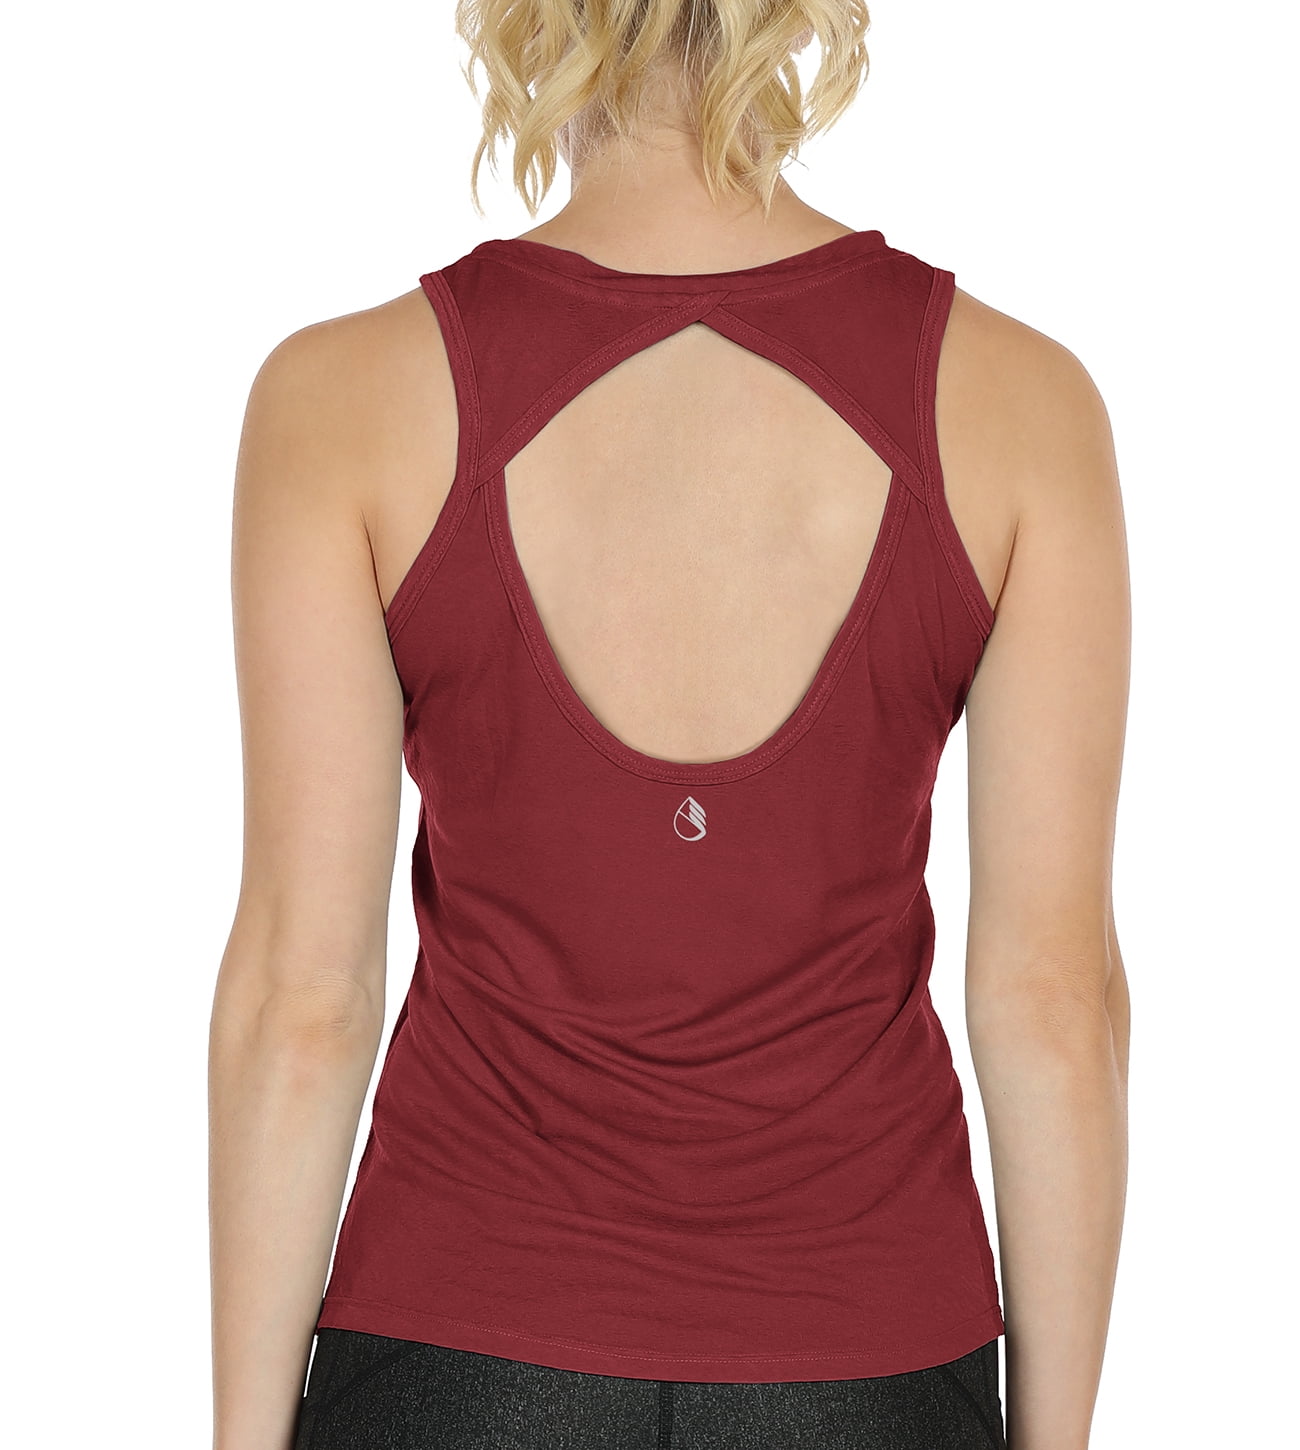 Pack of 2 icyzone Yoga Tops Activewear Workout Clothes Open Back Fitness Racerback Tank Tops for Women 